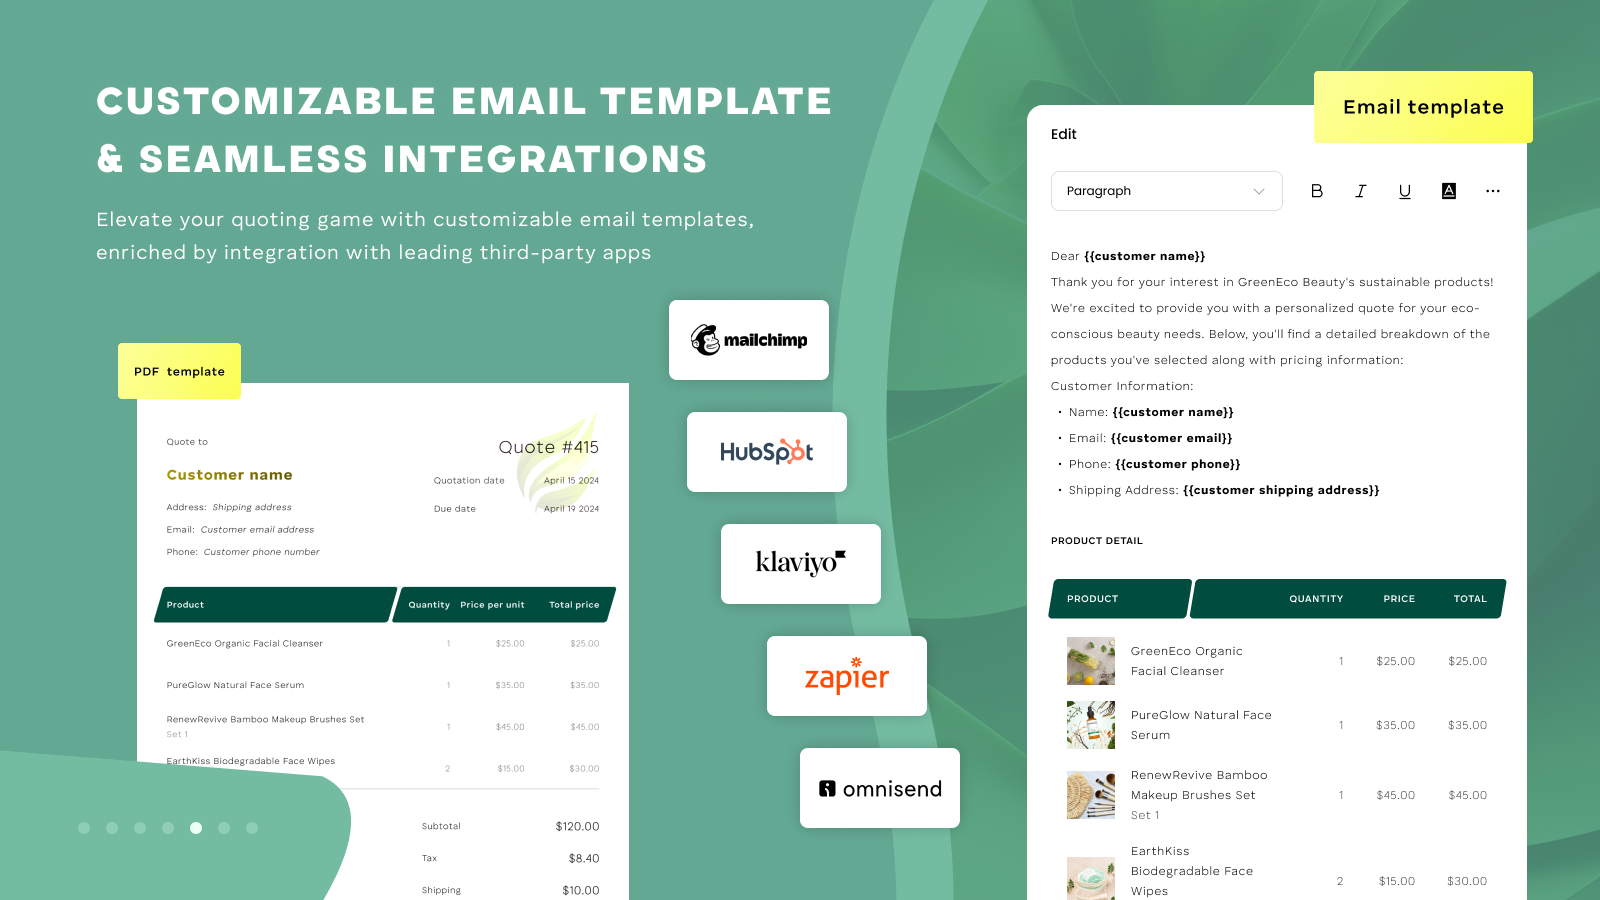 Customize email template and integrate third-party apps